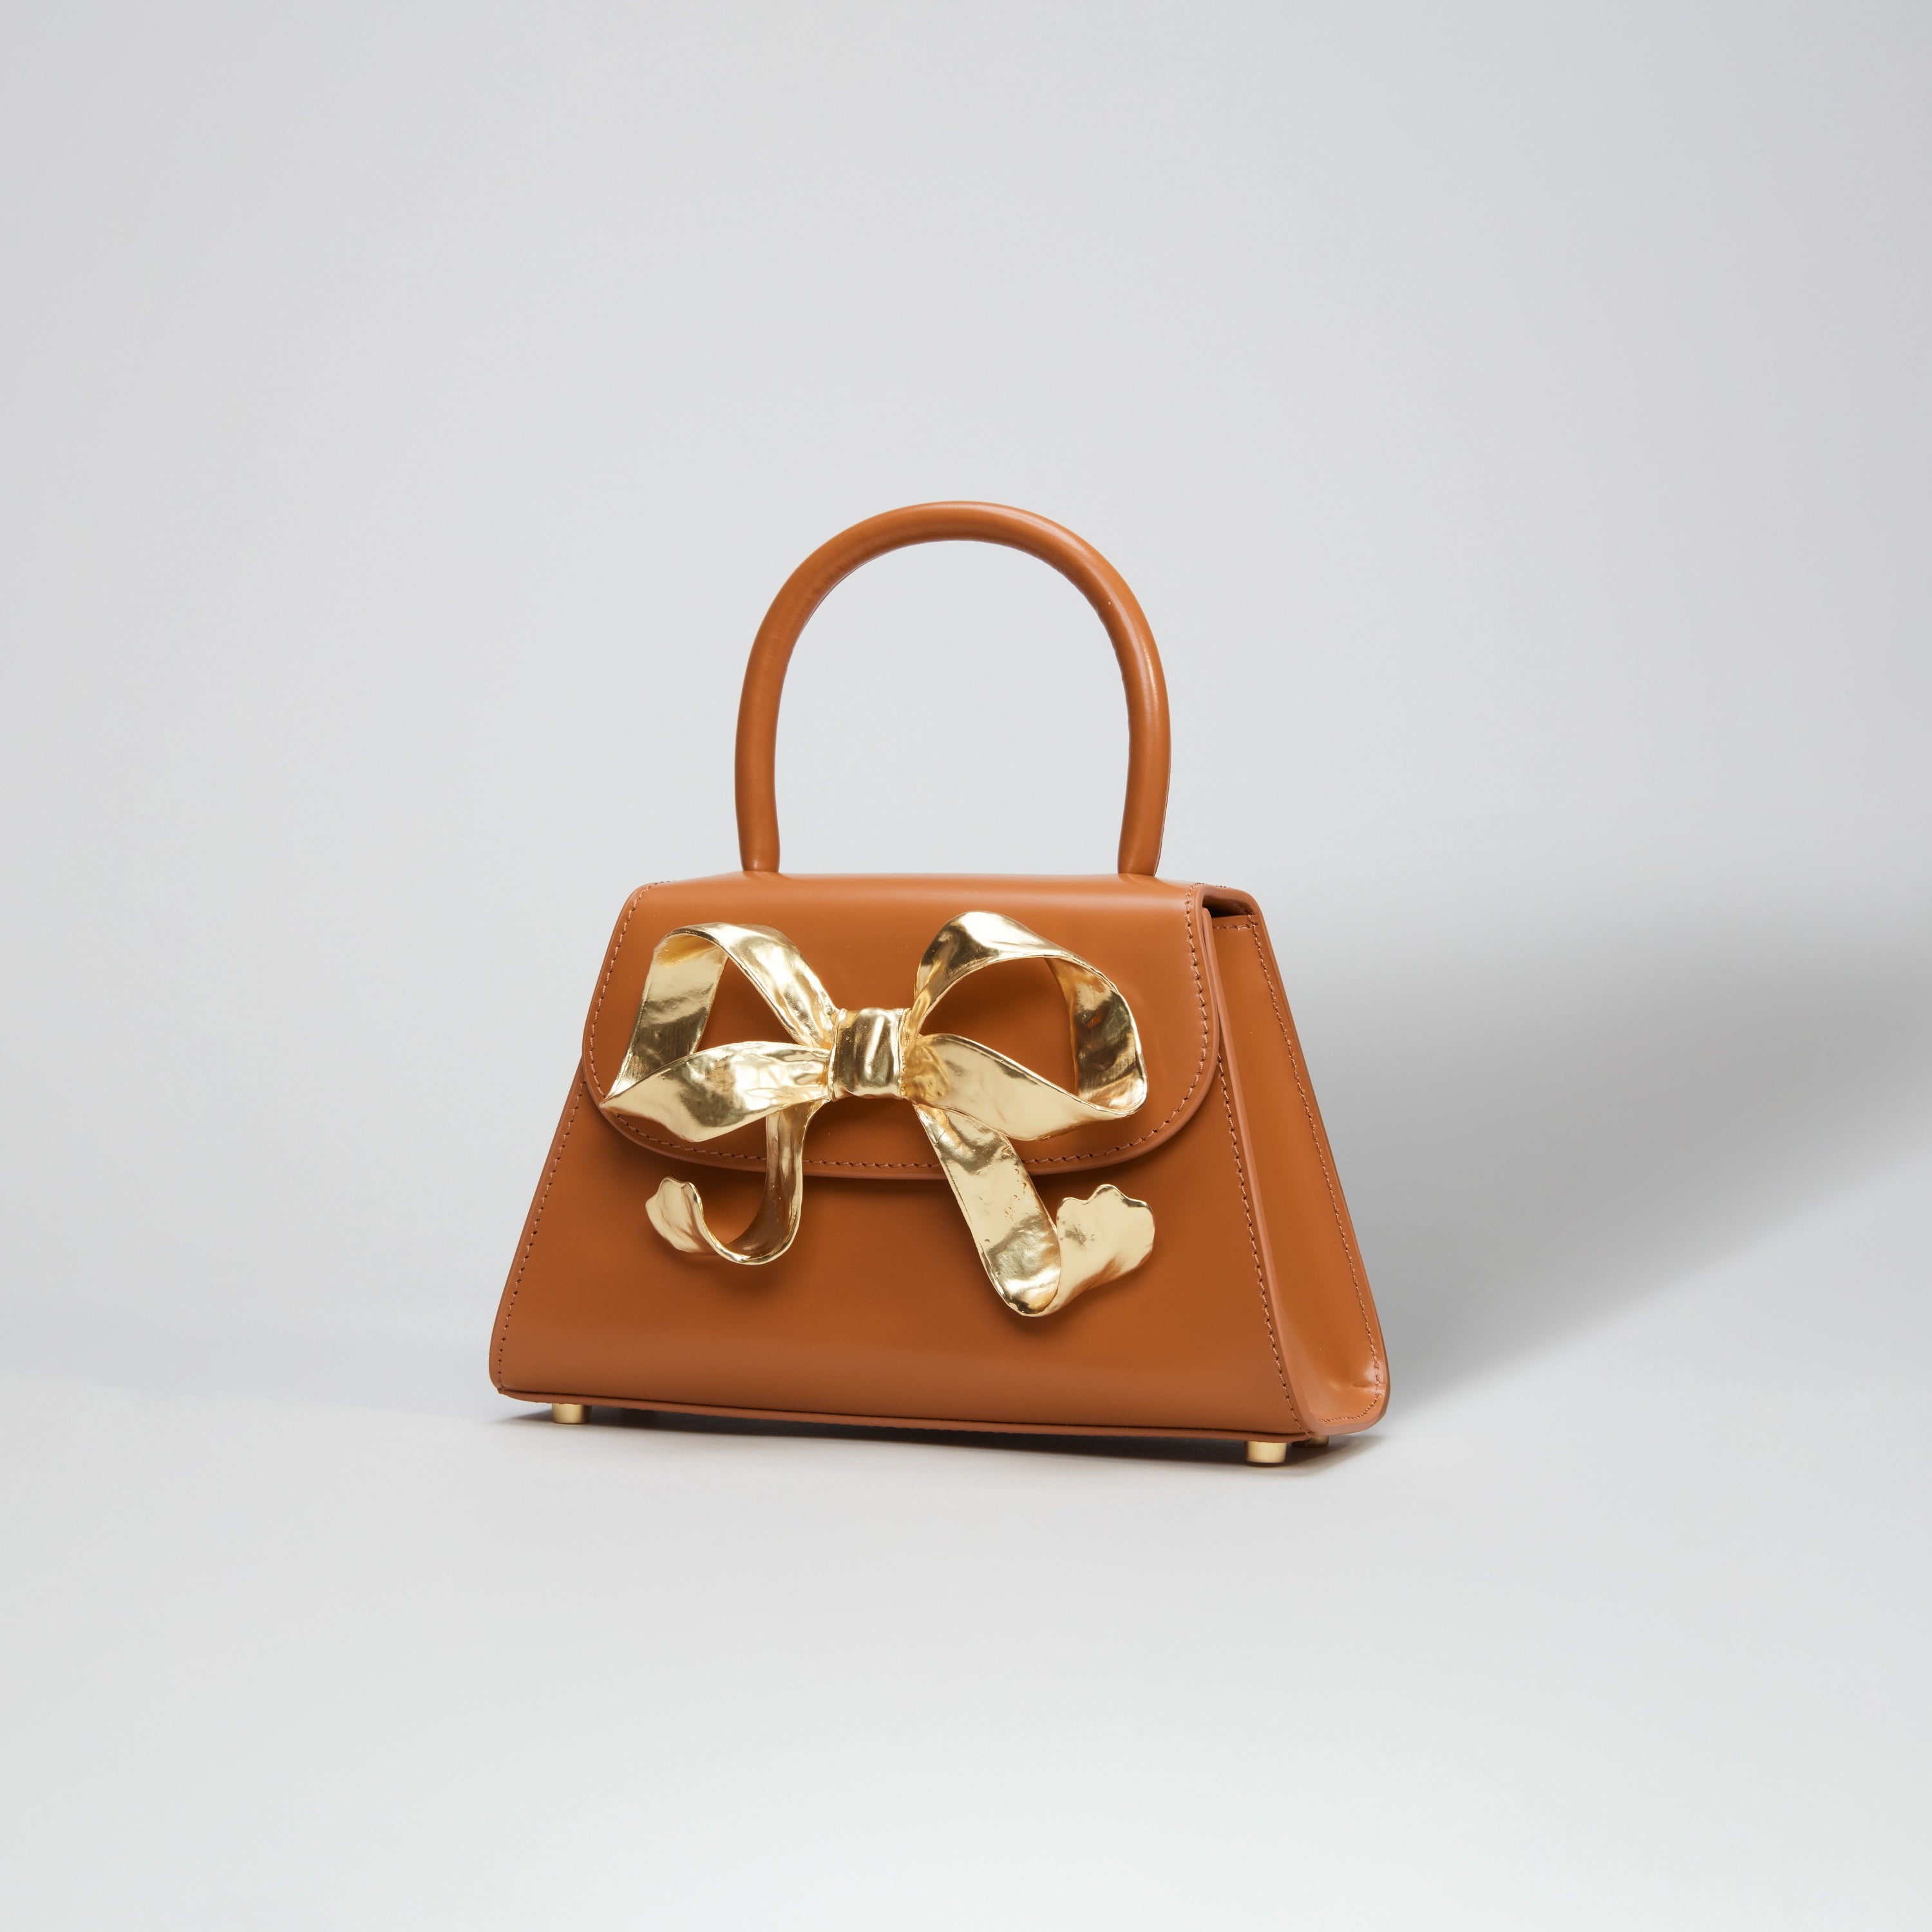 The Bow Mini in Tan with Gold Hardware - 2